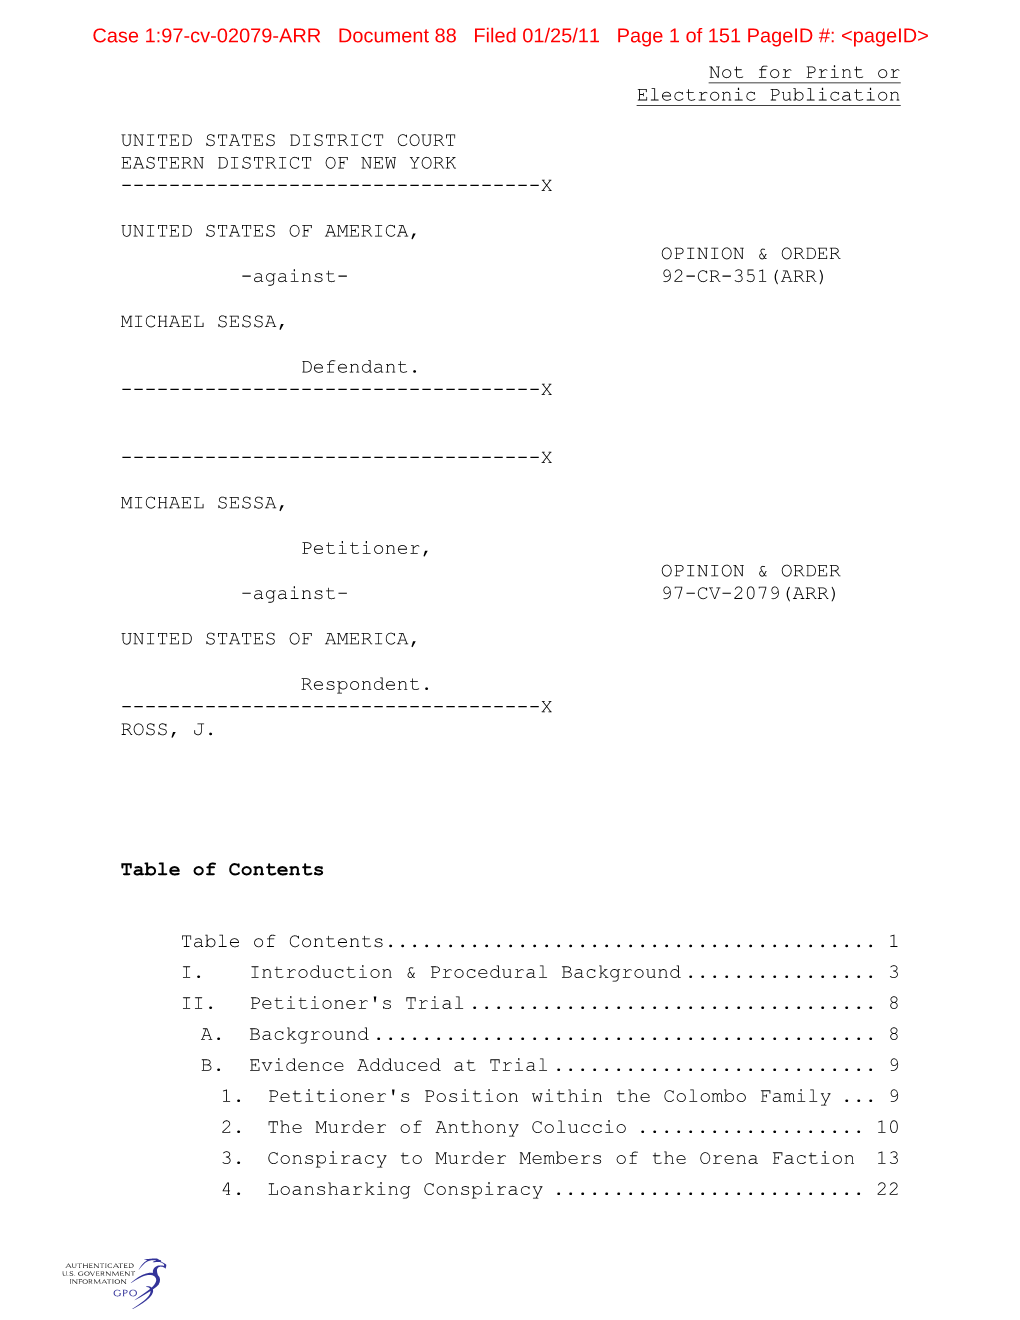 Case 1:97-Cv-02079-ARR Document 88 Filed 01/25/11 Page 1 of 151 Pageid